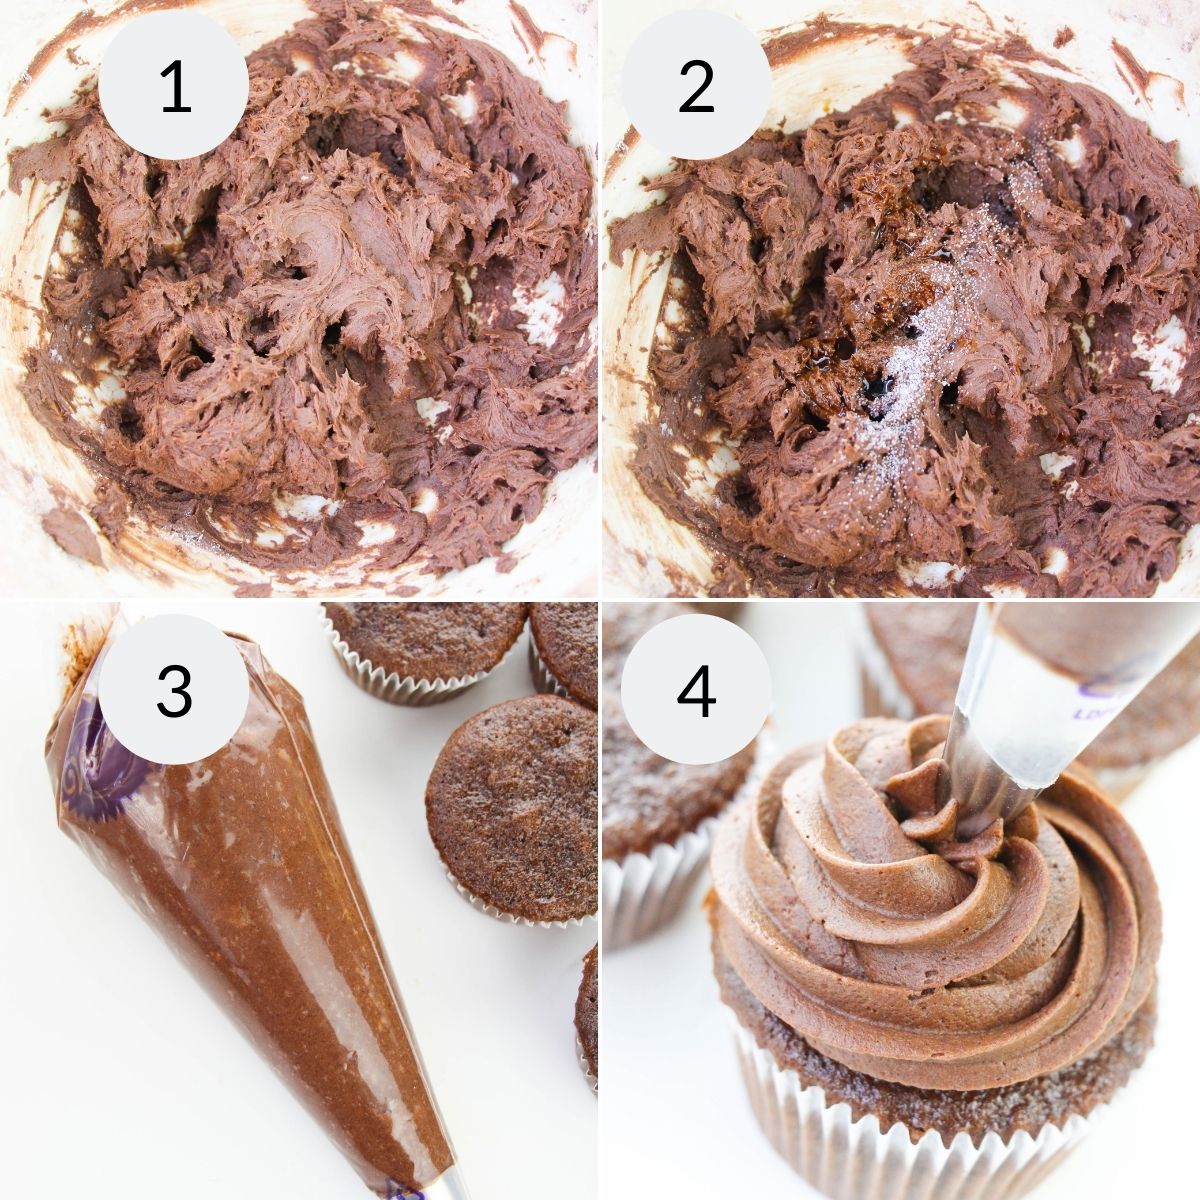 The ingredients being whipped, then put into a piping bag and finally being added to a cupcake.